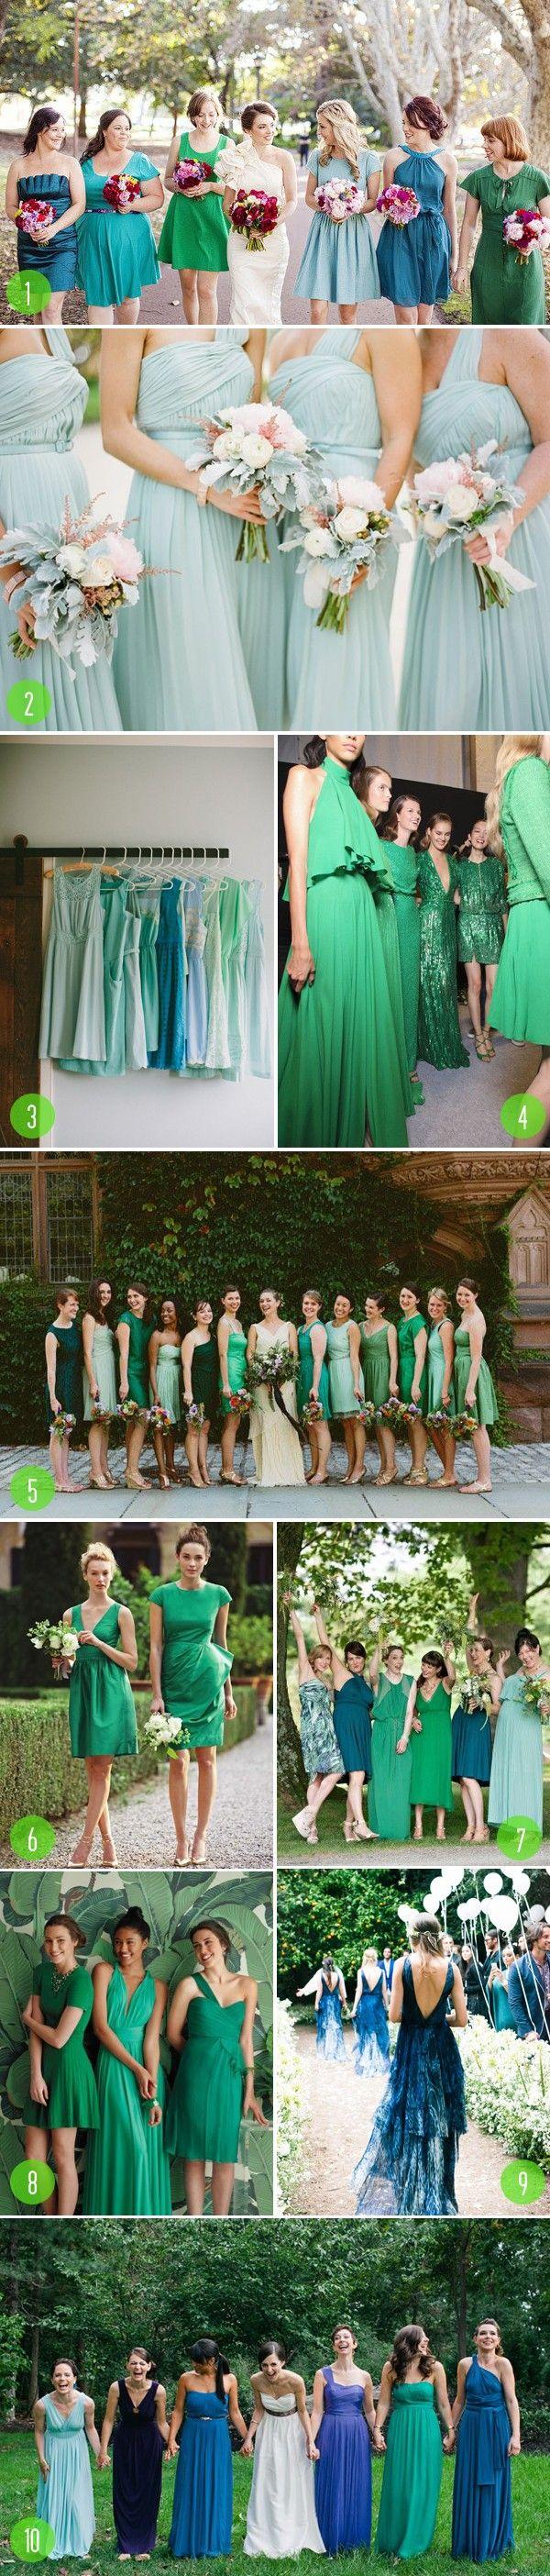 Wedding - Top 10: Cool Colored Bridesmaids Dresses